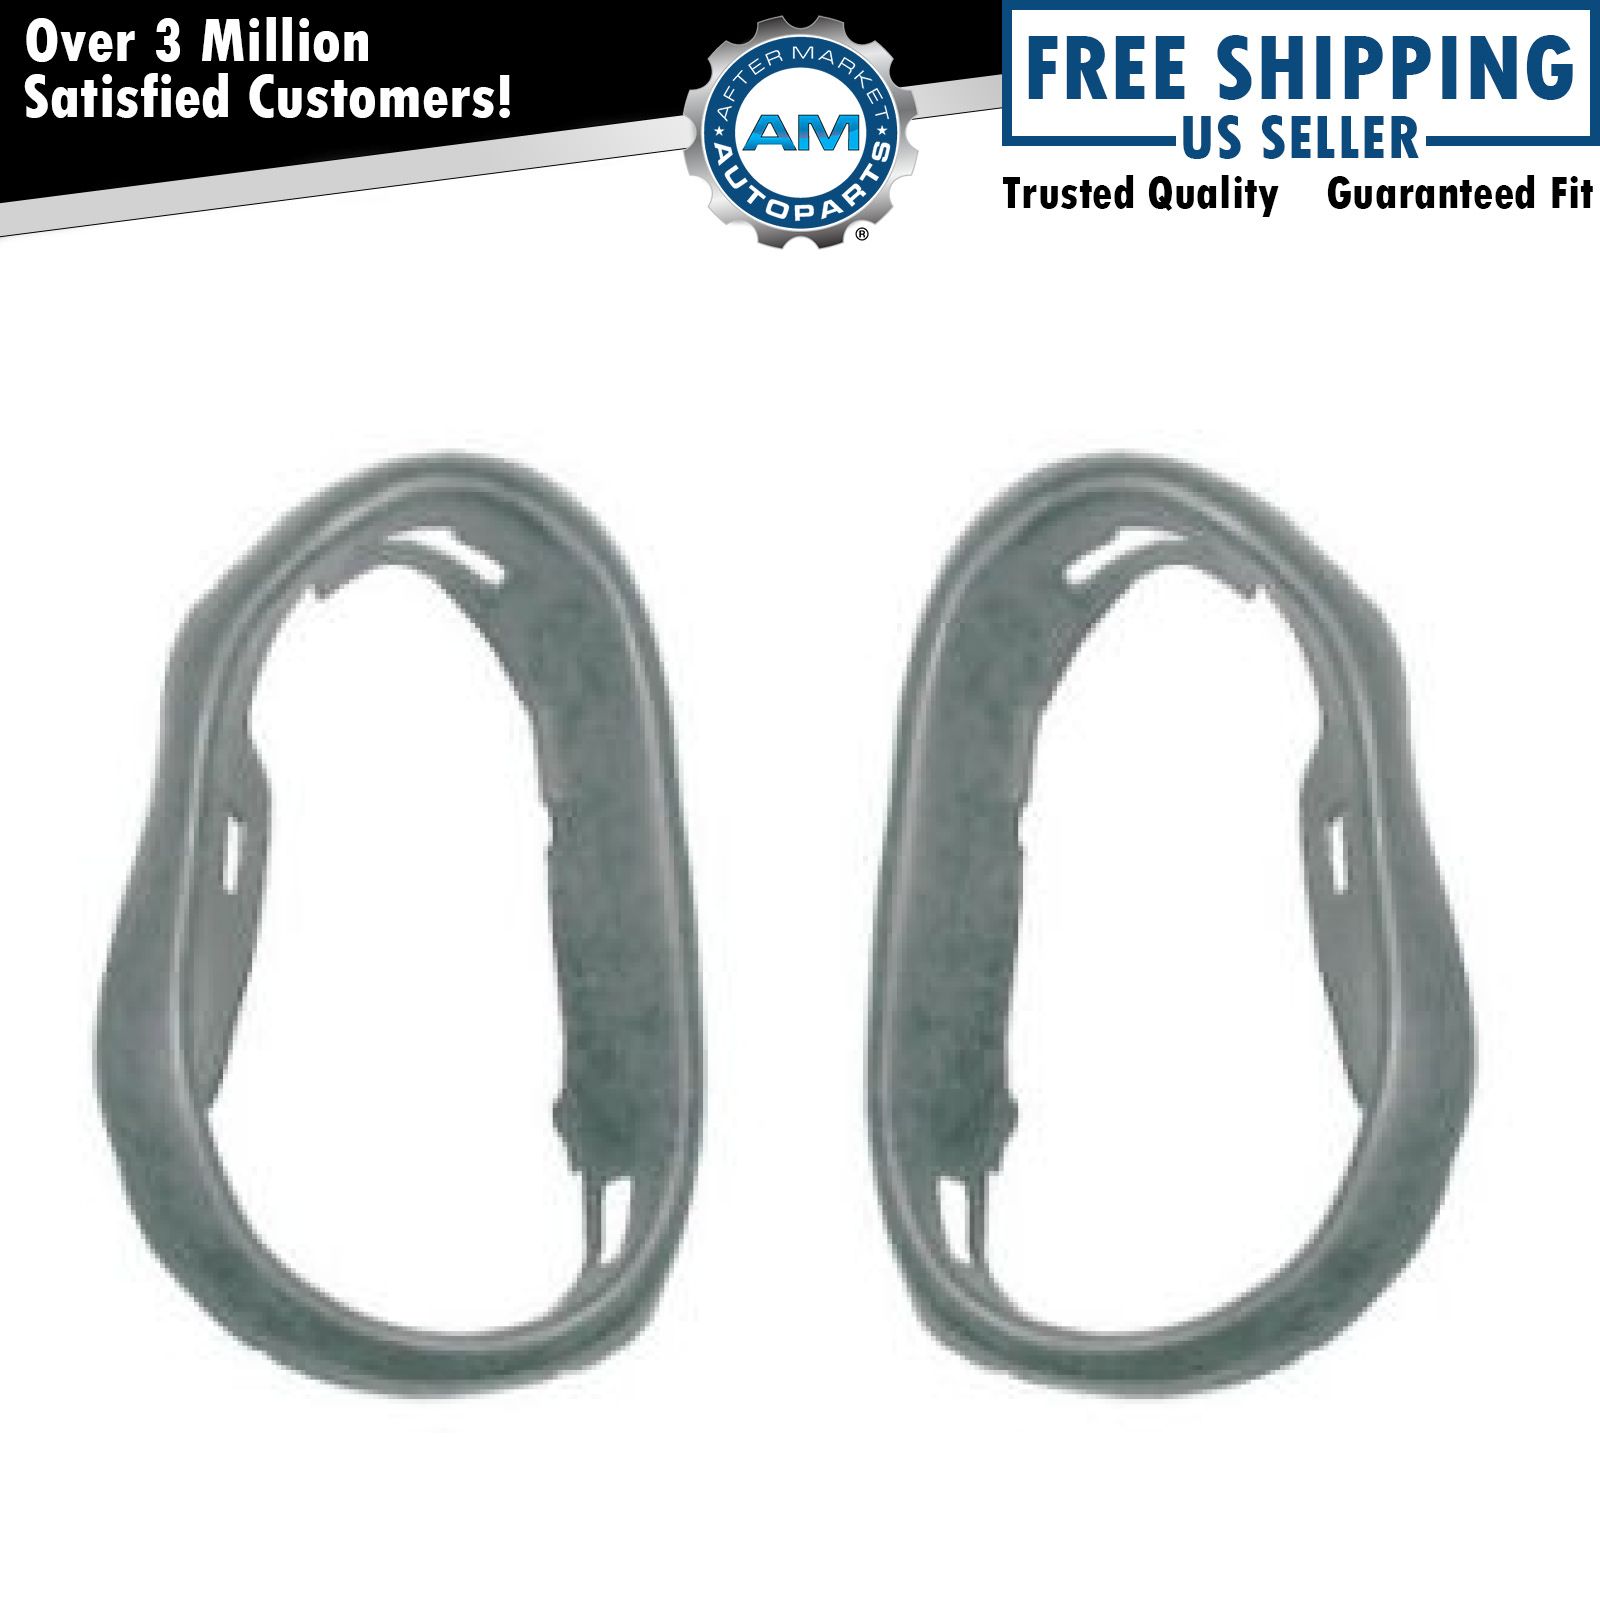 Rubber Headlights Headlamps Gasket Set Seals Pair for 95-99 Dodge Plymouth Neon